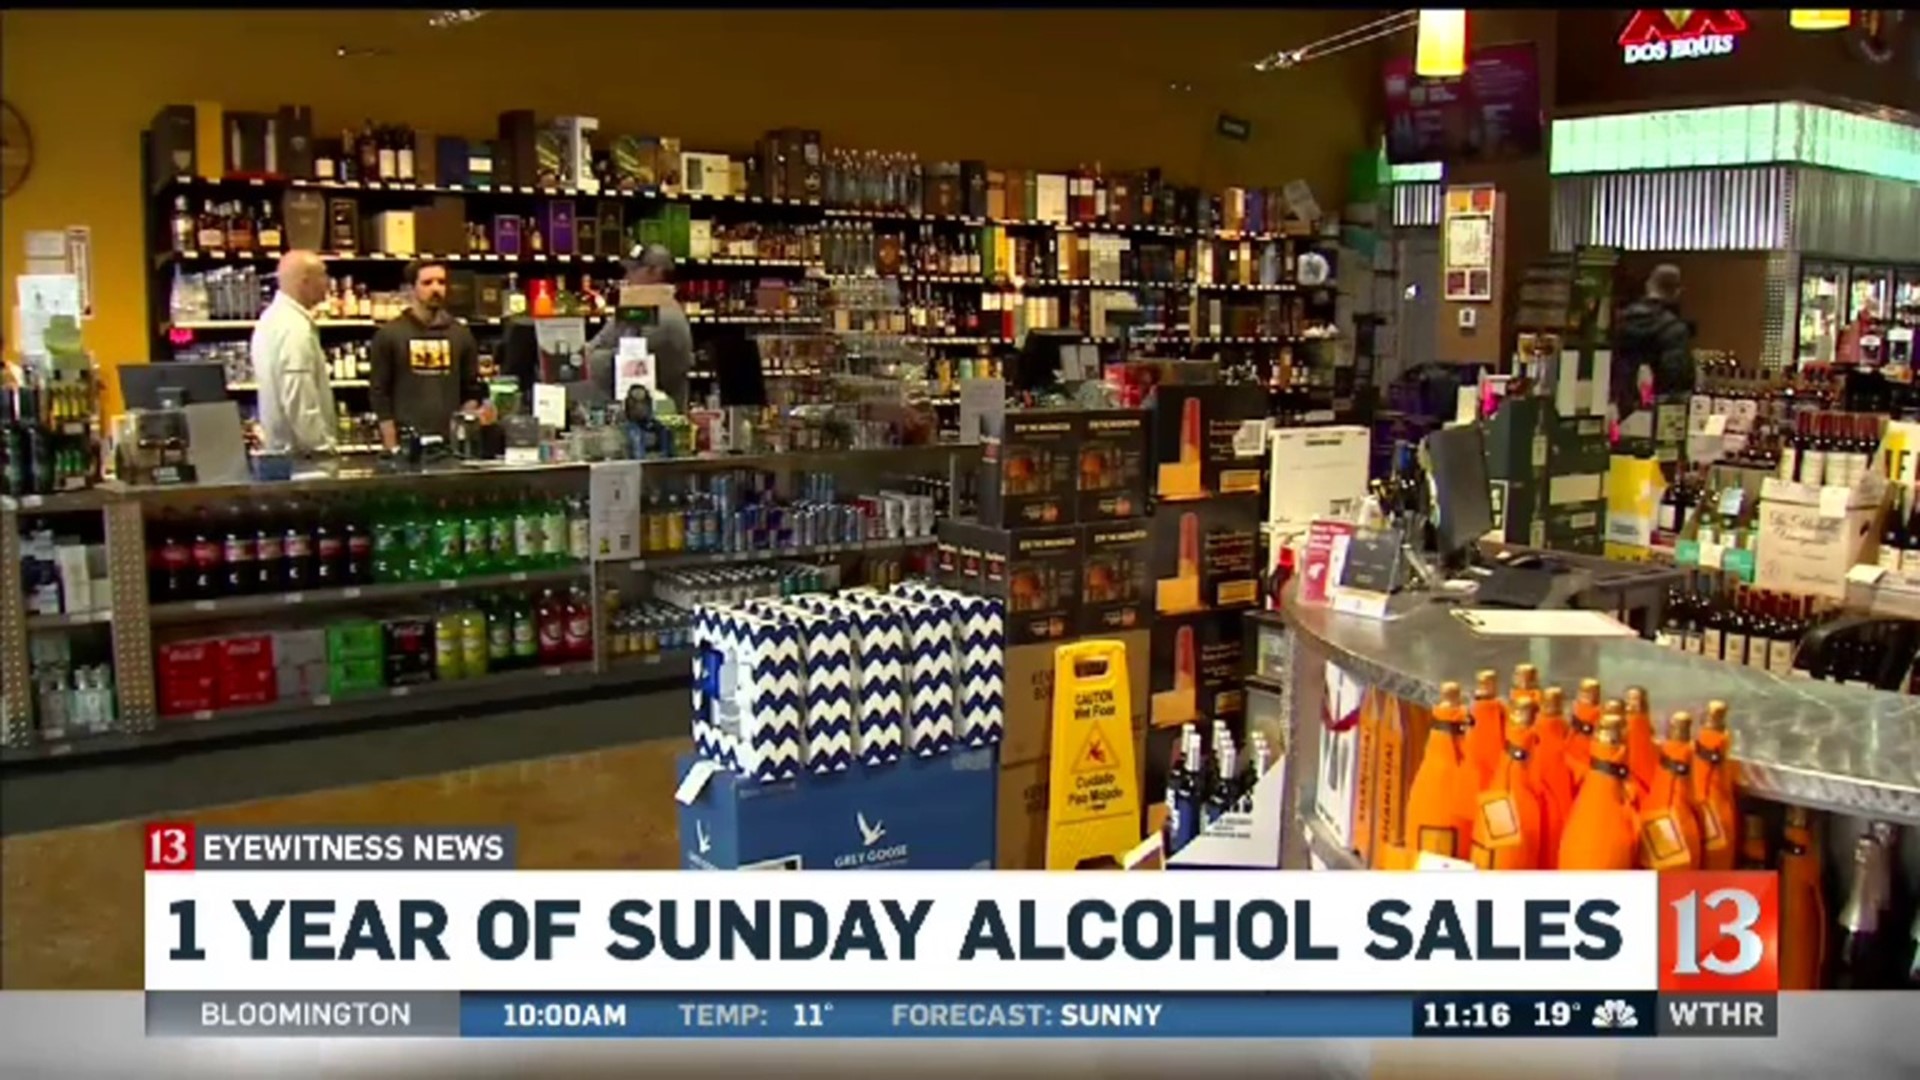 Liquor store owner still embracing Sunday sales 1 year after law change |  wthr.com